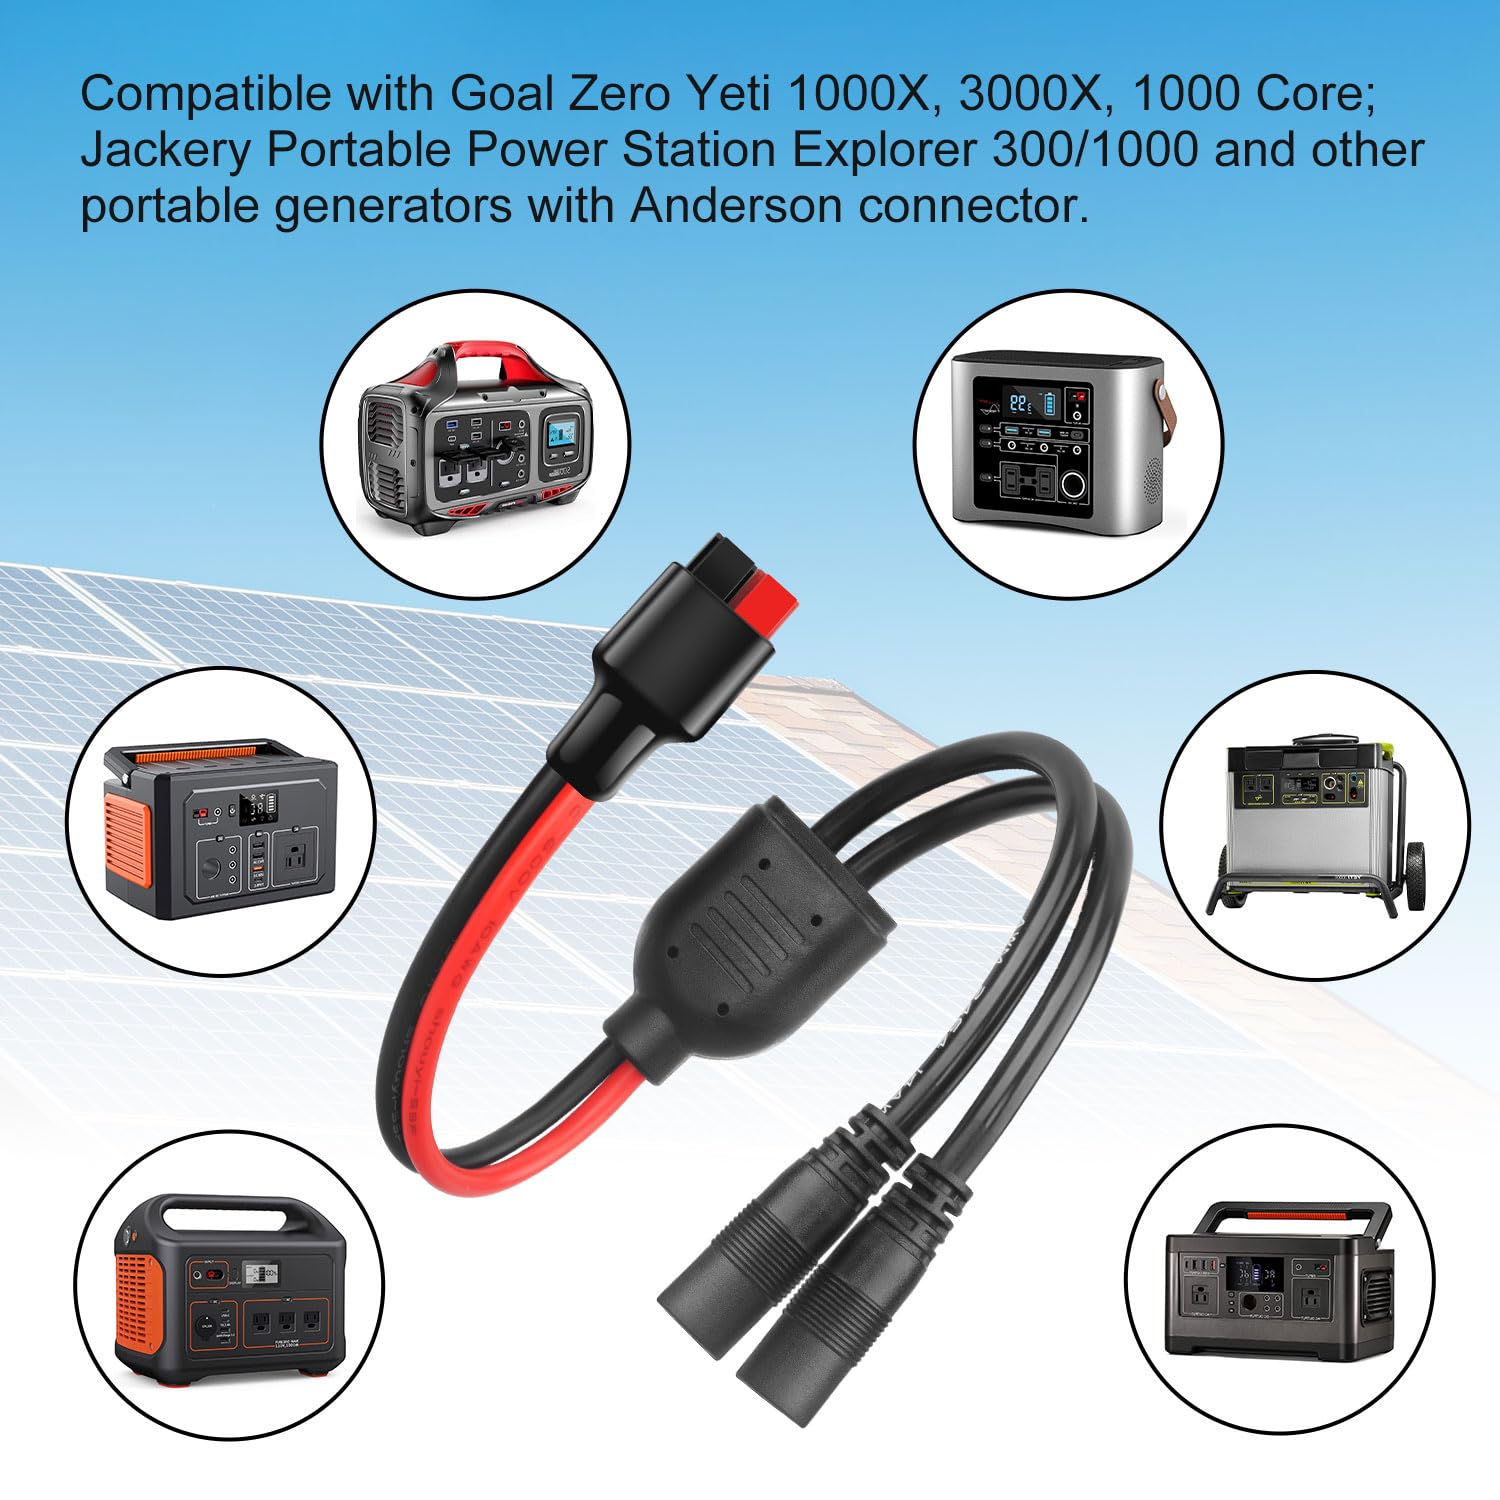 PAEKQ Anderson to DC 8mm Female Adapter Cable 1 to 2 High Power Port to 8mm Splitter Solar Connector 8mm Adapter to Anderson Y Parallel Cable Compatible with Goal Zero Jackery Anderson Powerpole